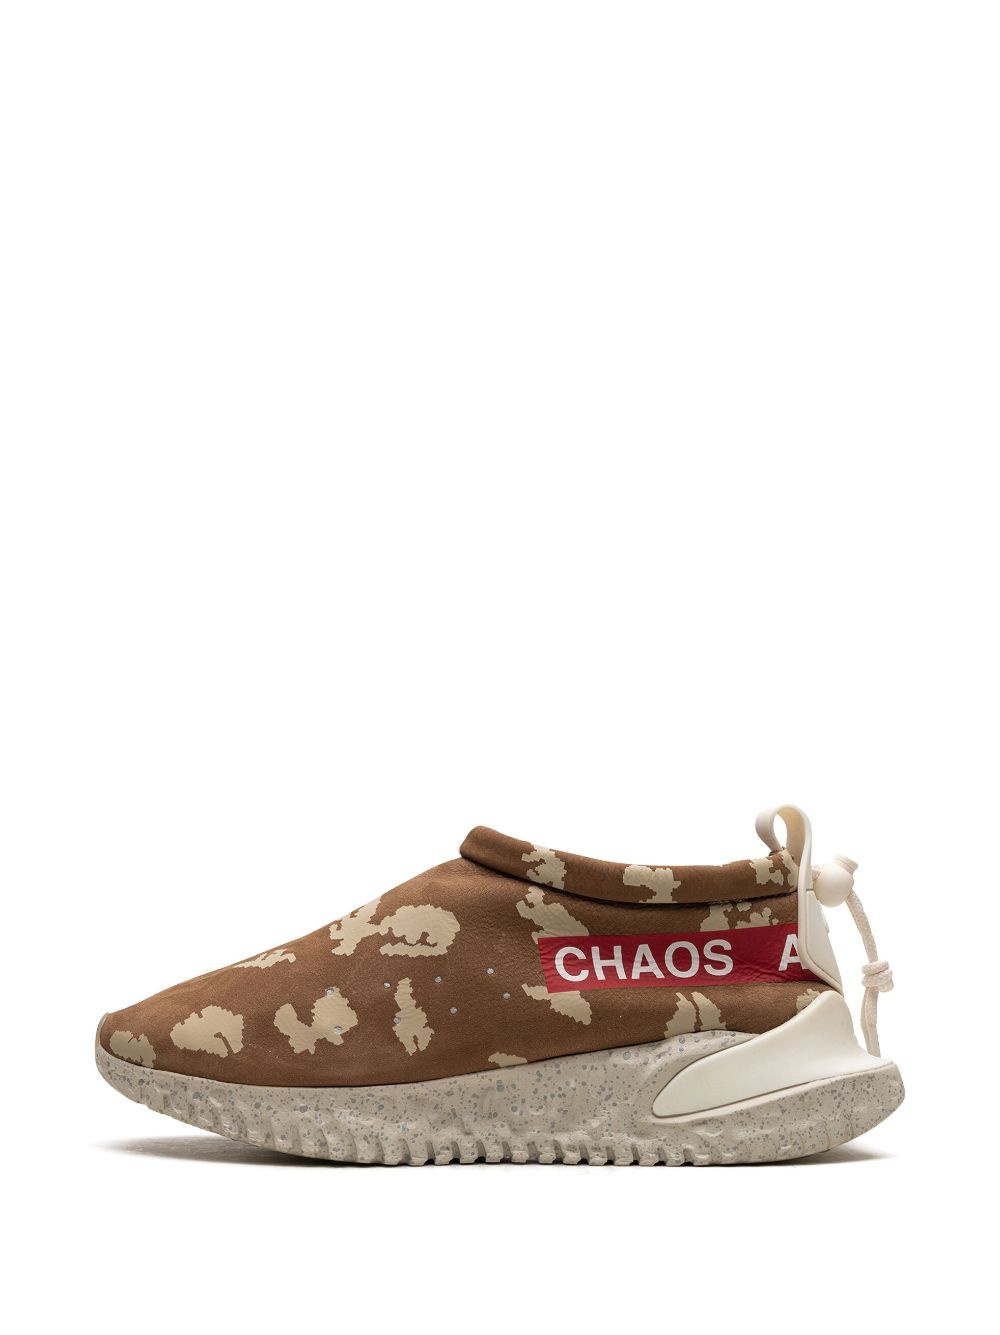 x UNDERCOVER Moc Flow "Ale Brown" sneakers - 7